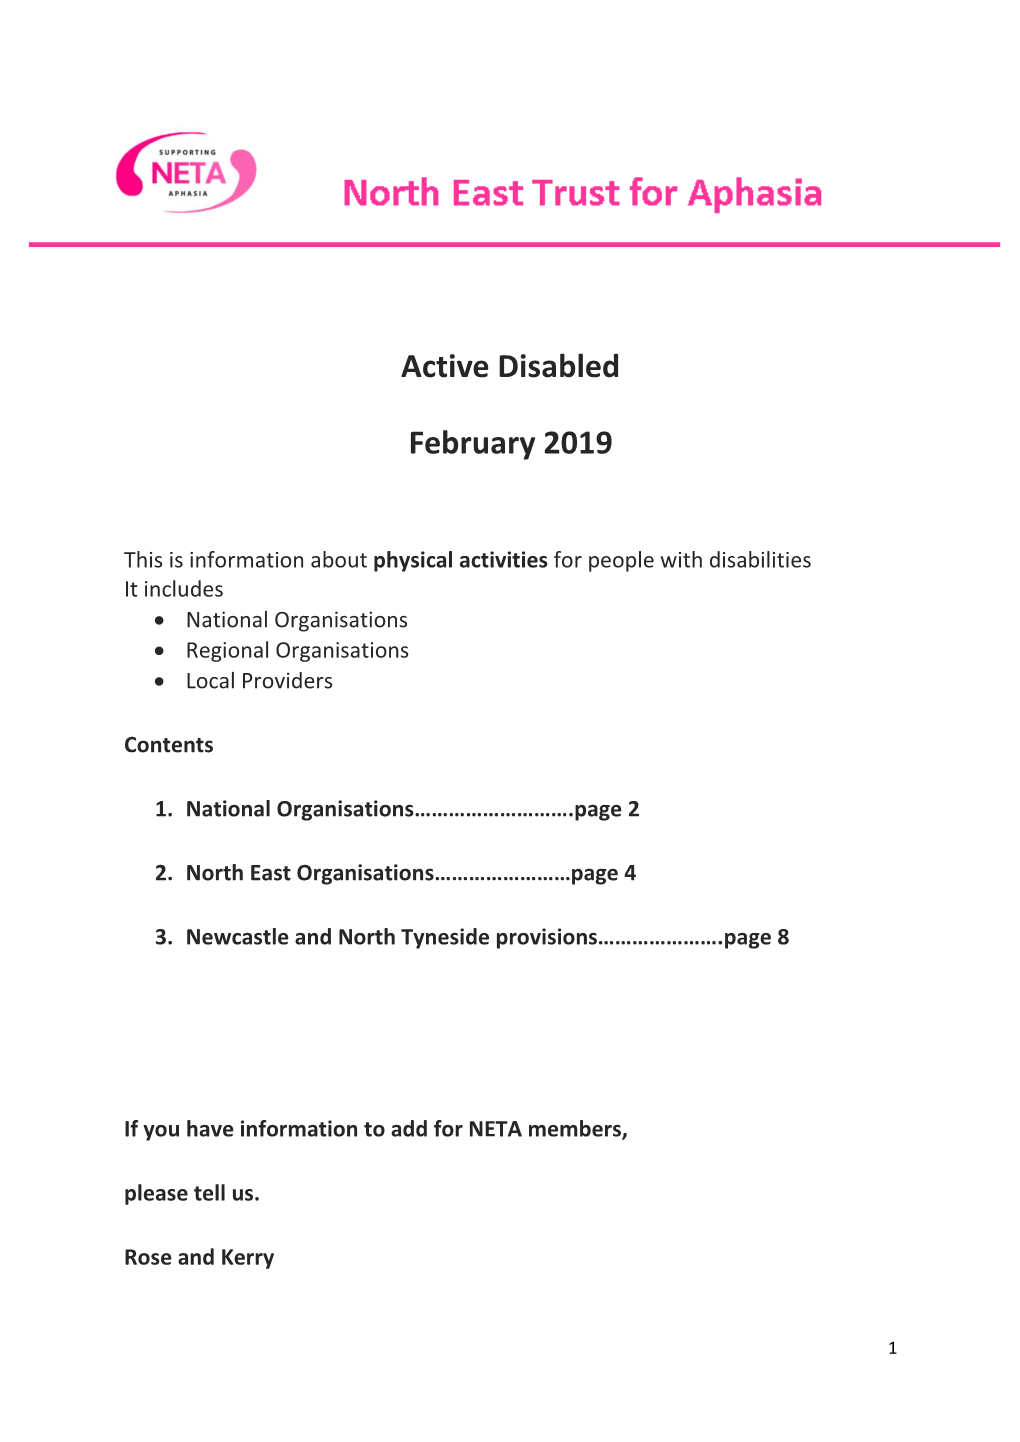 Active Disabled February 2019